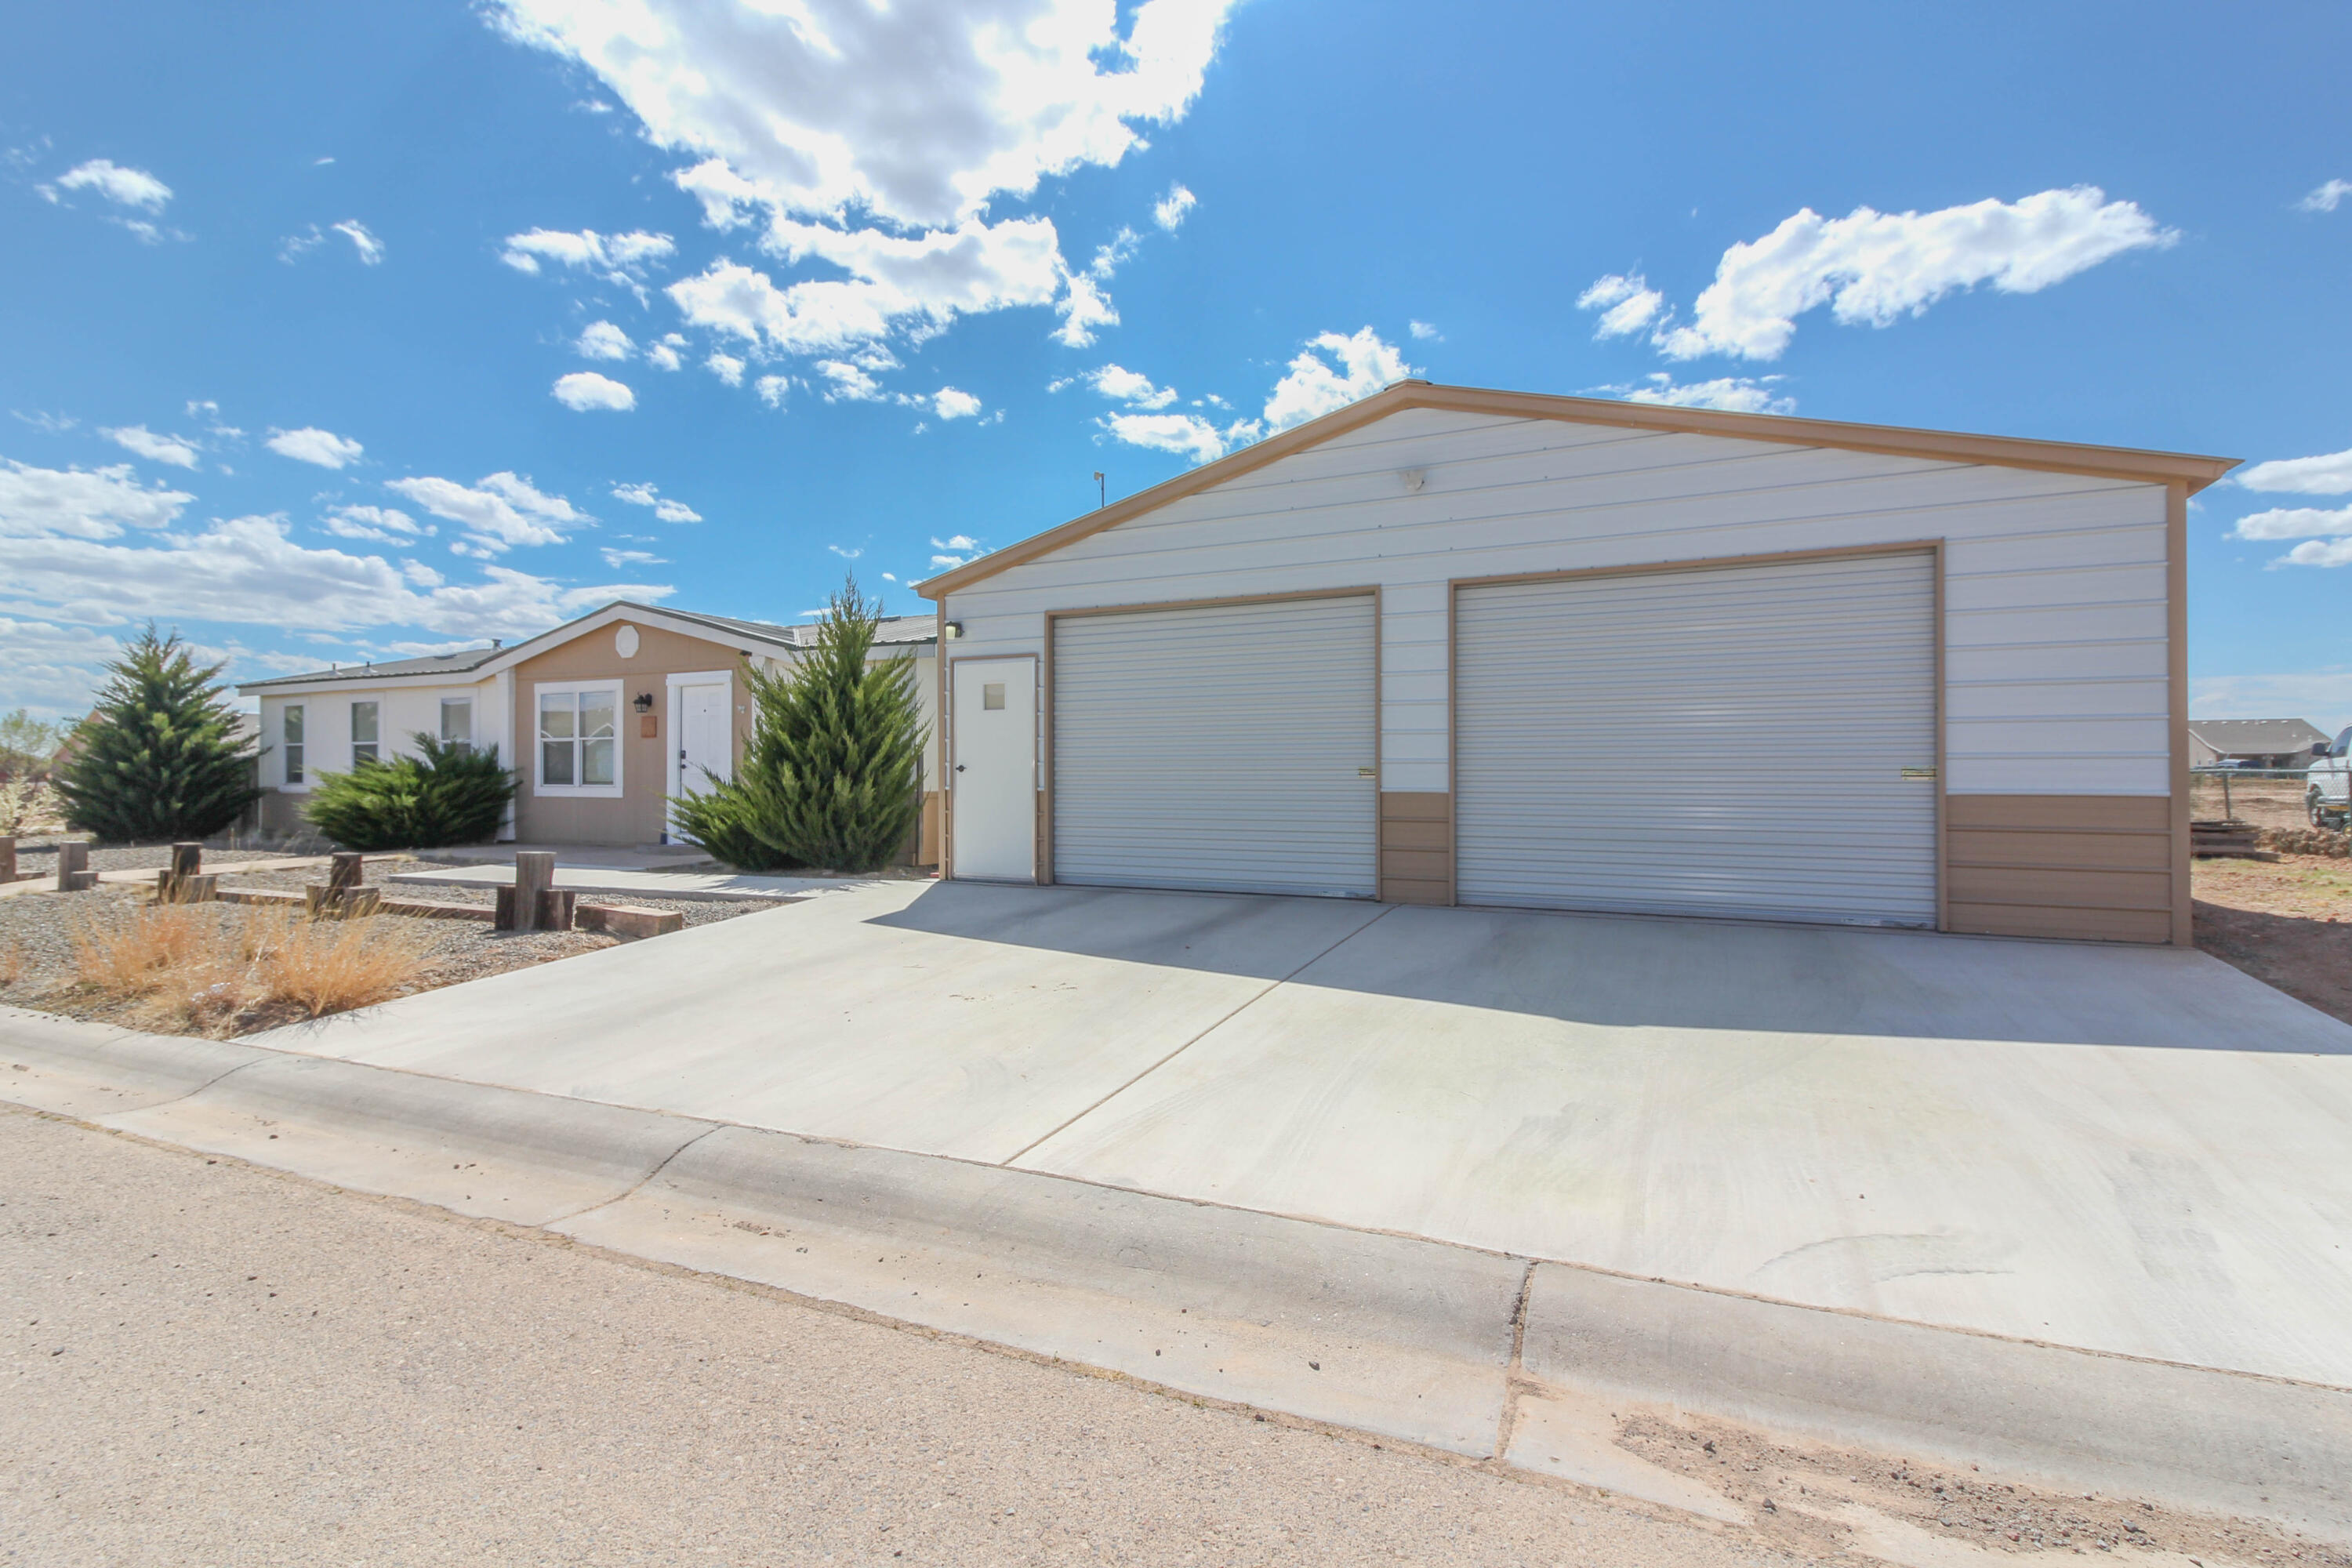 509 Camino Andres, Moriarty, New Mexico 87035, 3 Bedrooms Bedrooms, ,2 BathroomsBathrooms,Residential,For Sale,509 Camino Andres,1061234